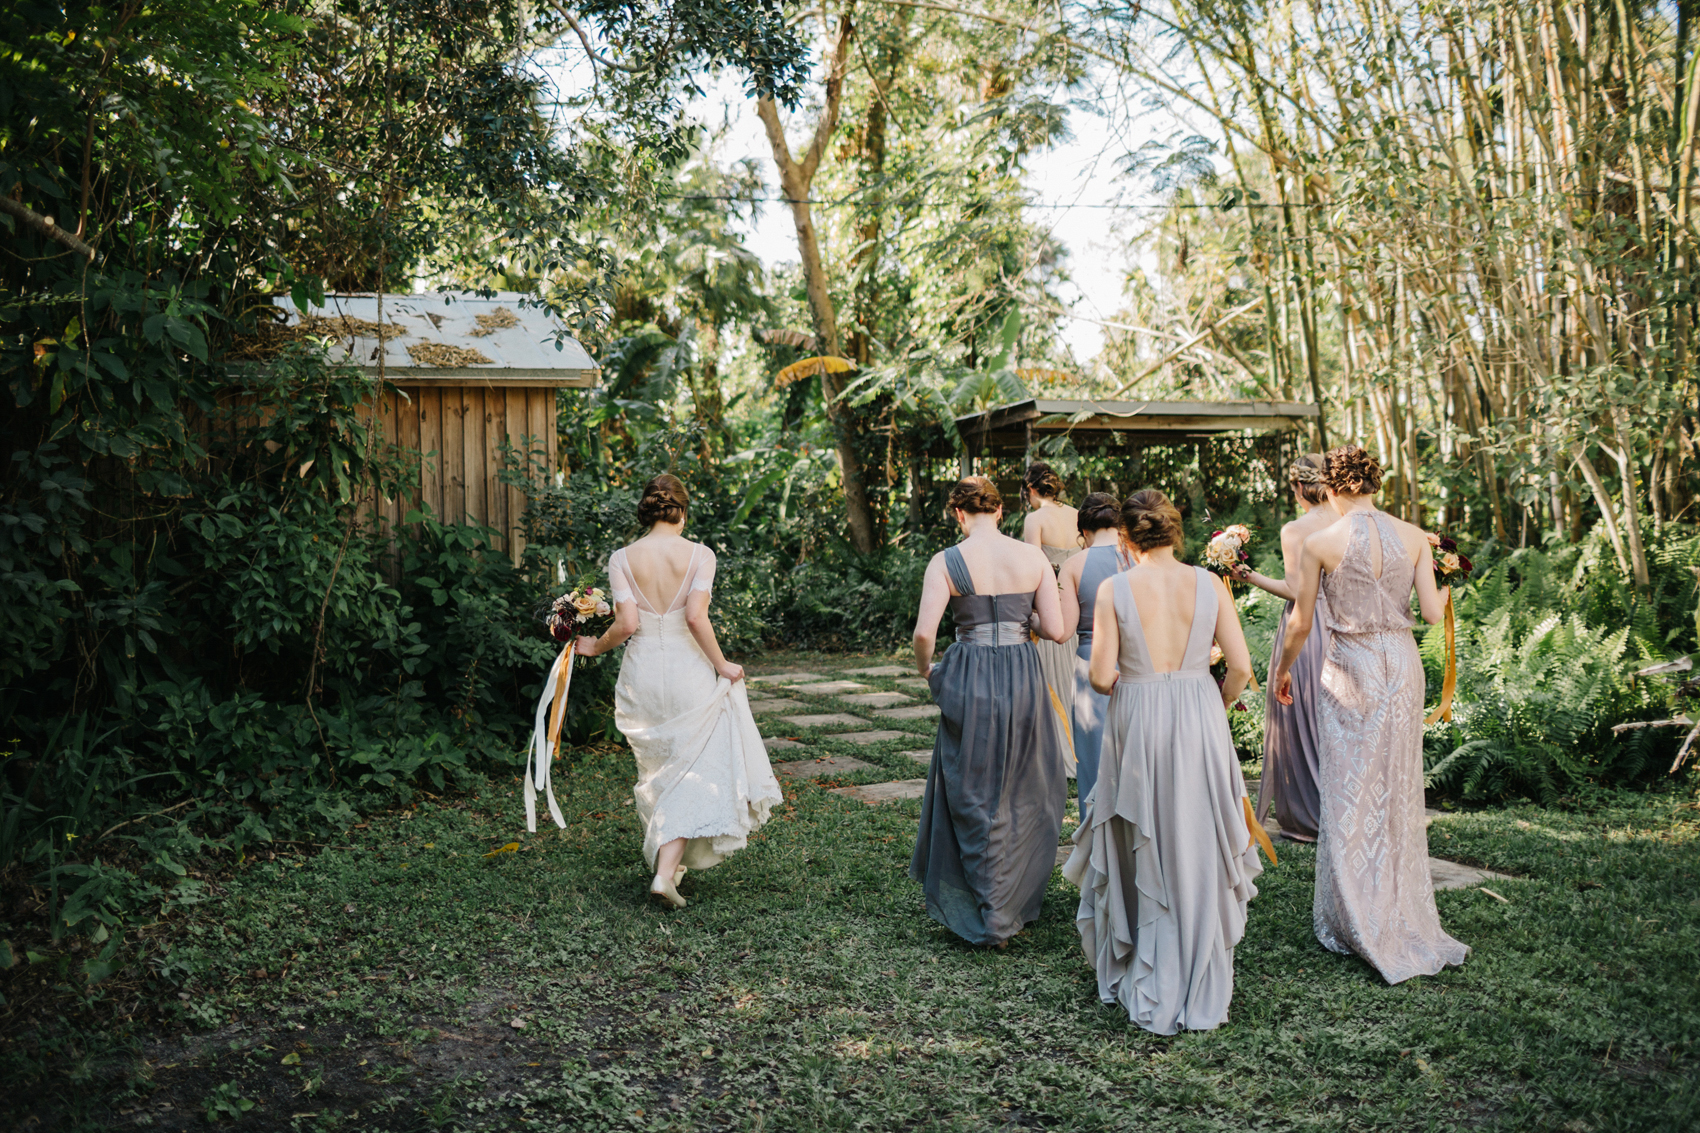 Bride and her bridesmaids wearing mismatched grey dresses walking through the garden